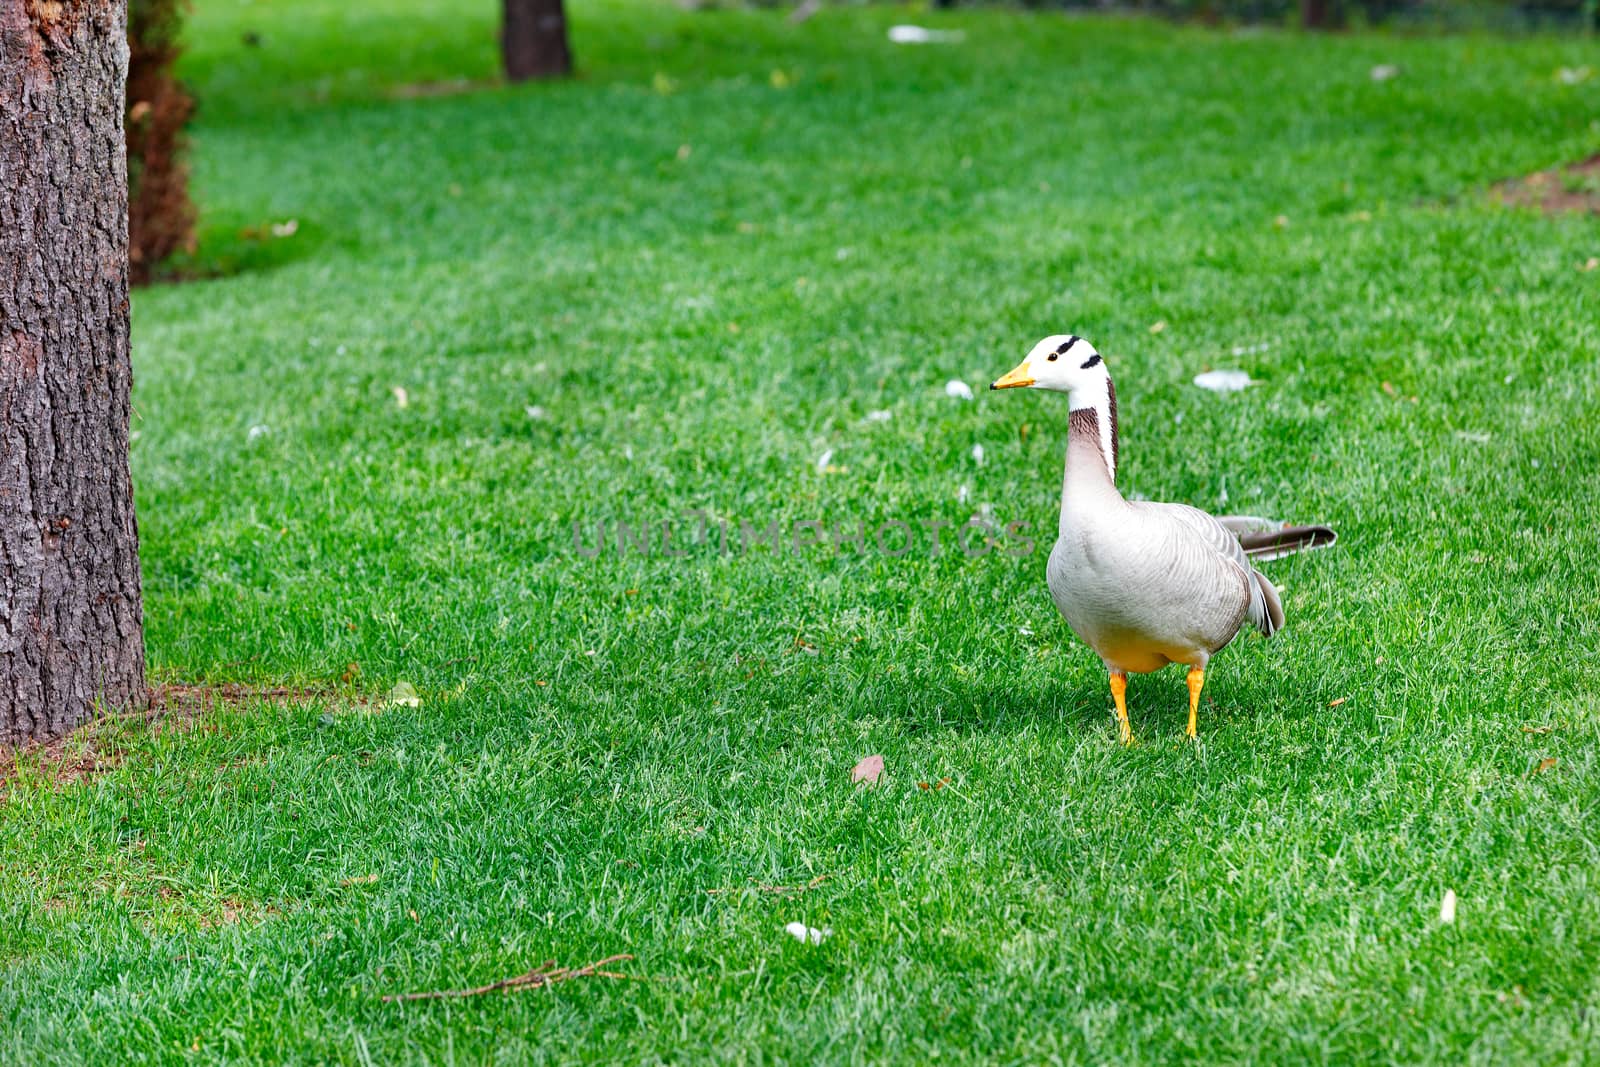 Bar-headed geese Anser indicus grazes on a green lawn among tall trees in a summer park. by Sergii